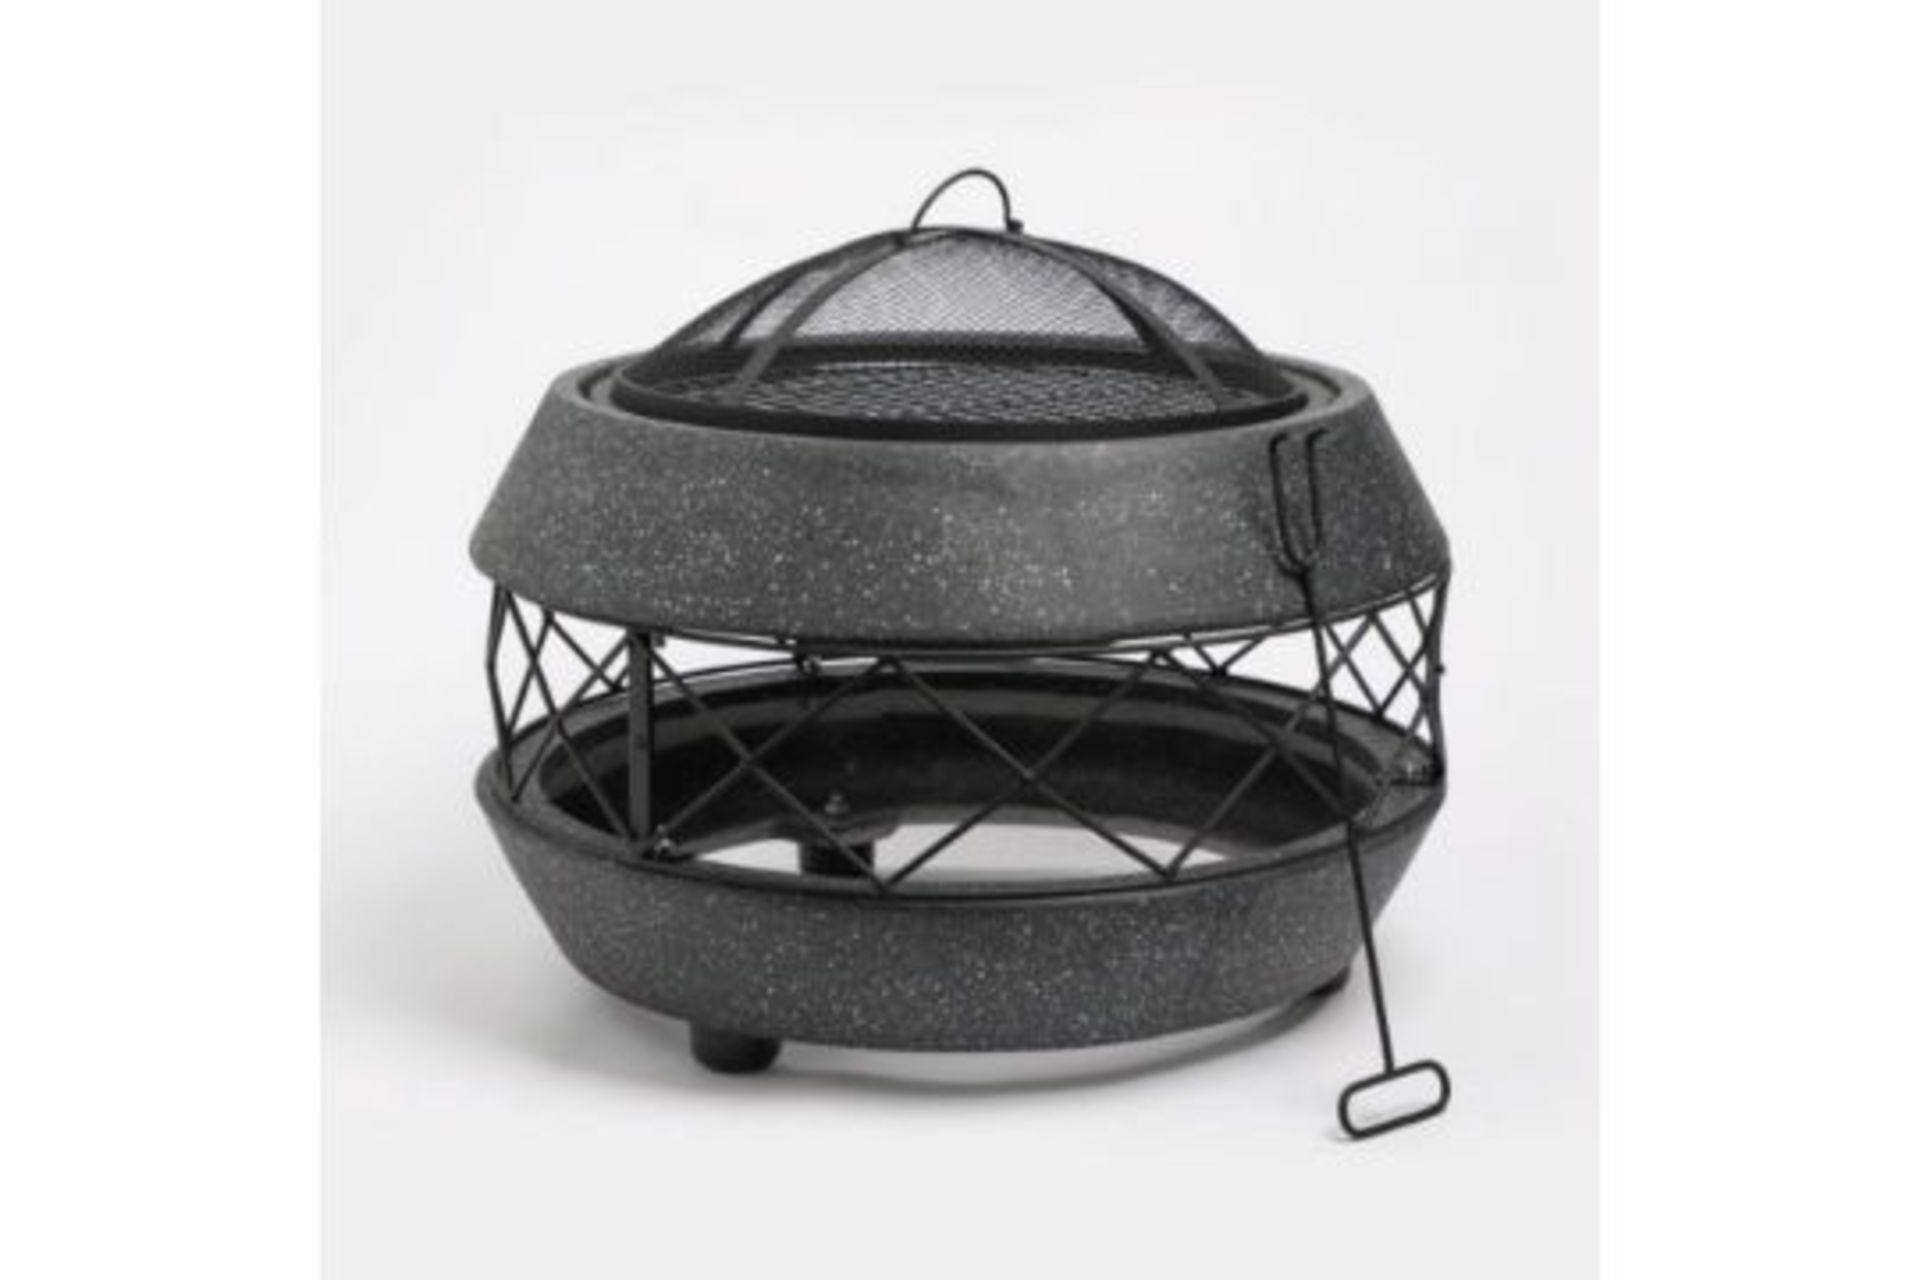 Brand New Black Faux Concrete Mgo Fire Pit - Vonhaus - Outdoor Heating - Firepits 2500563 rrp £189